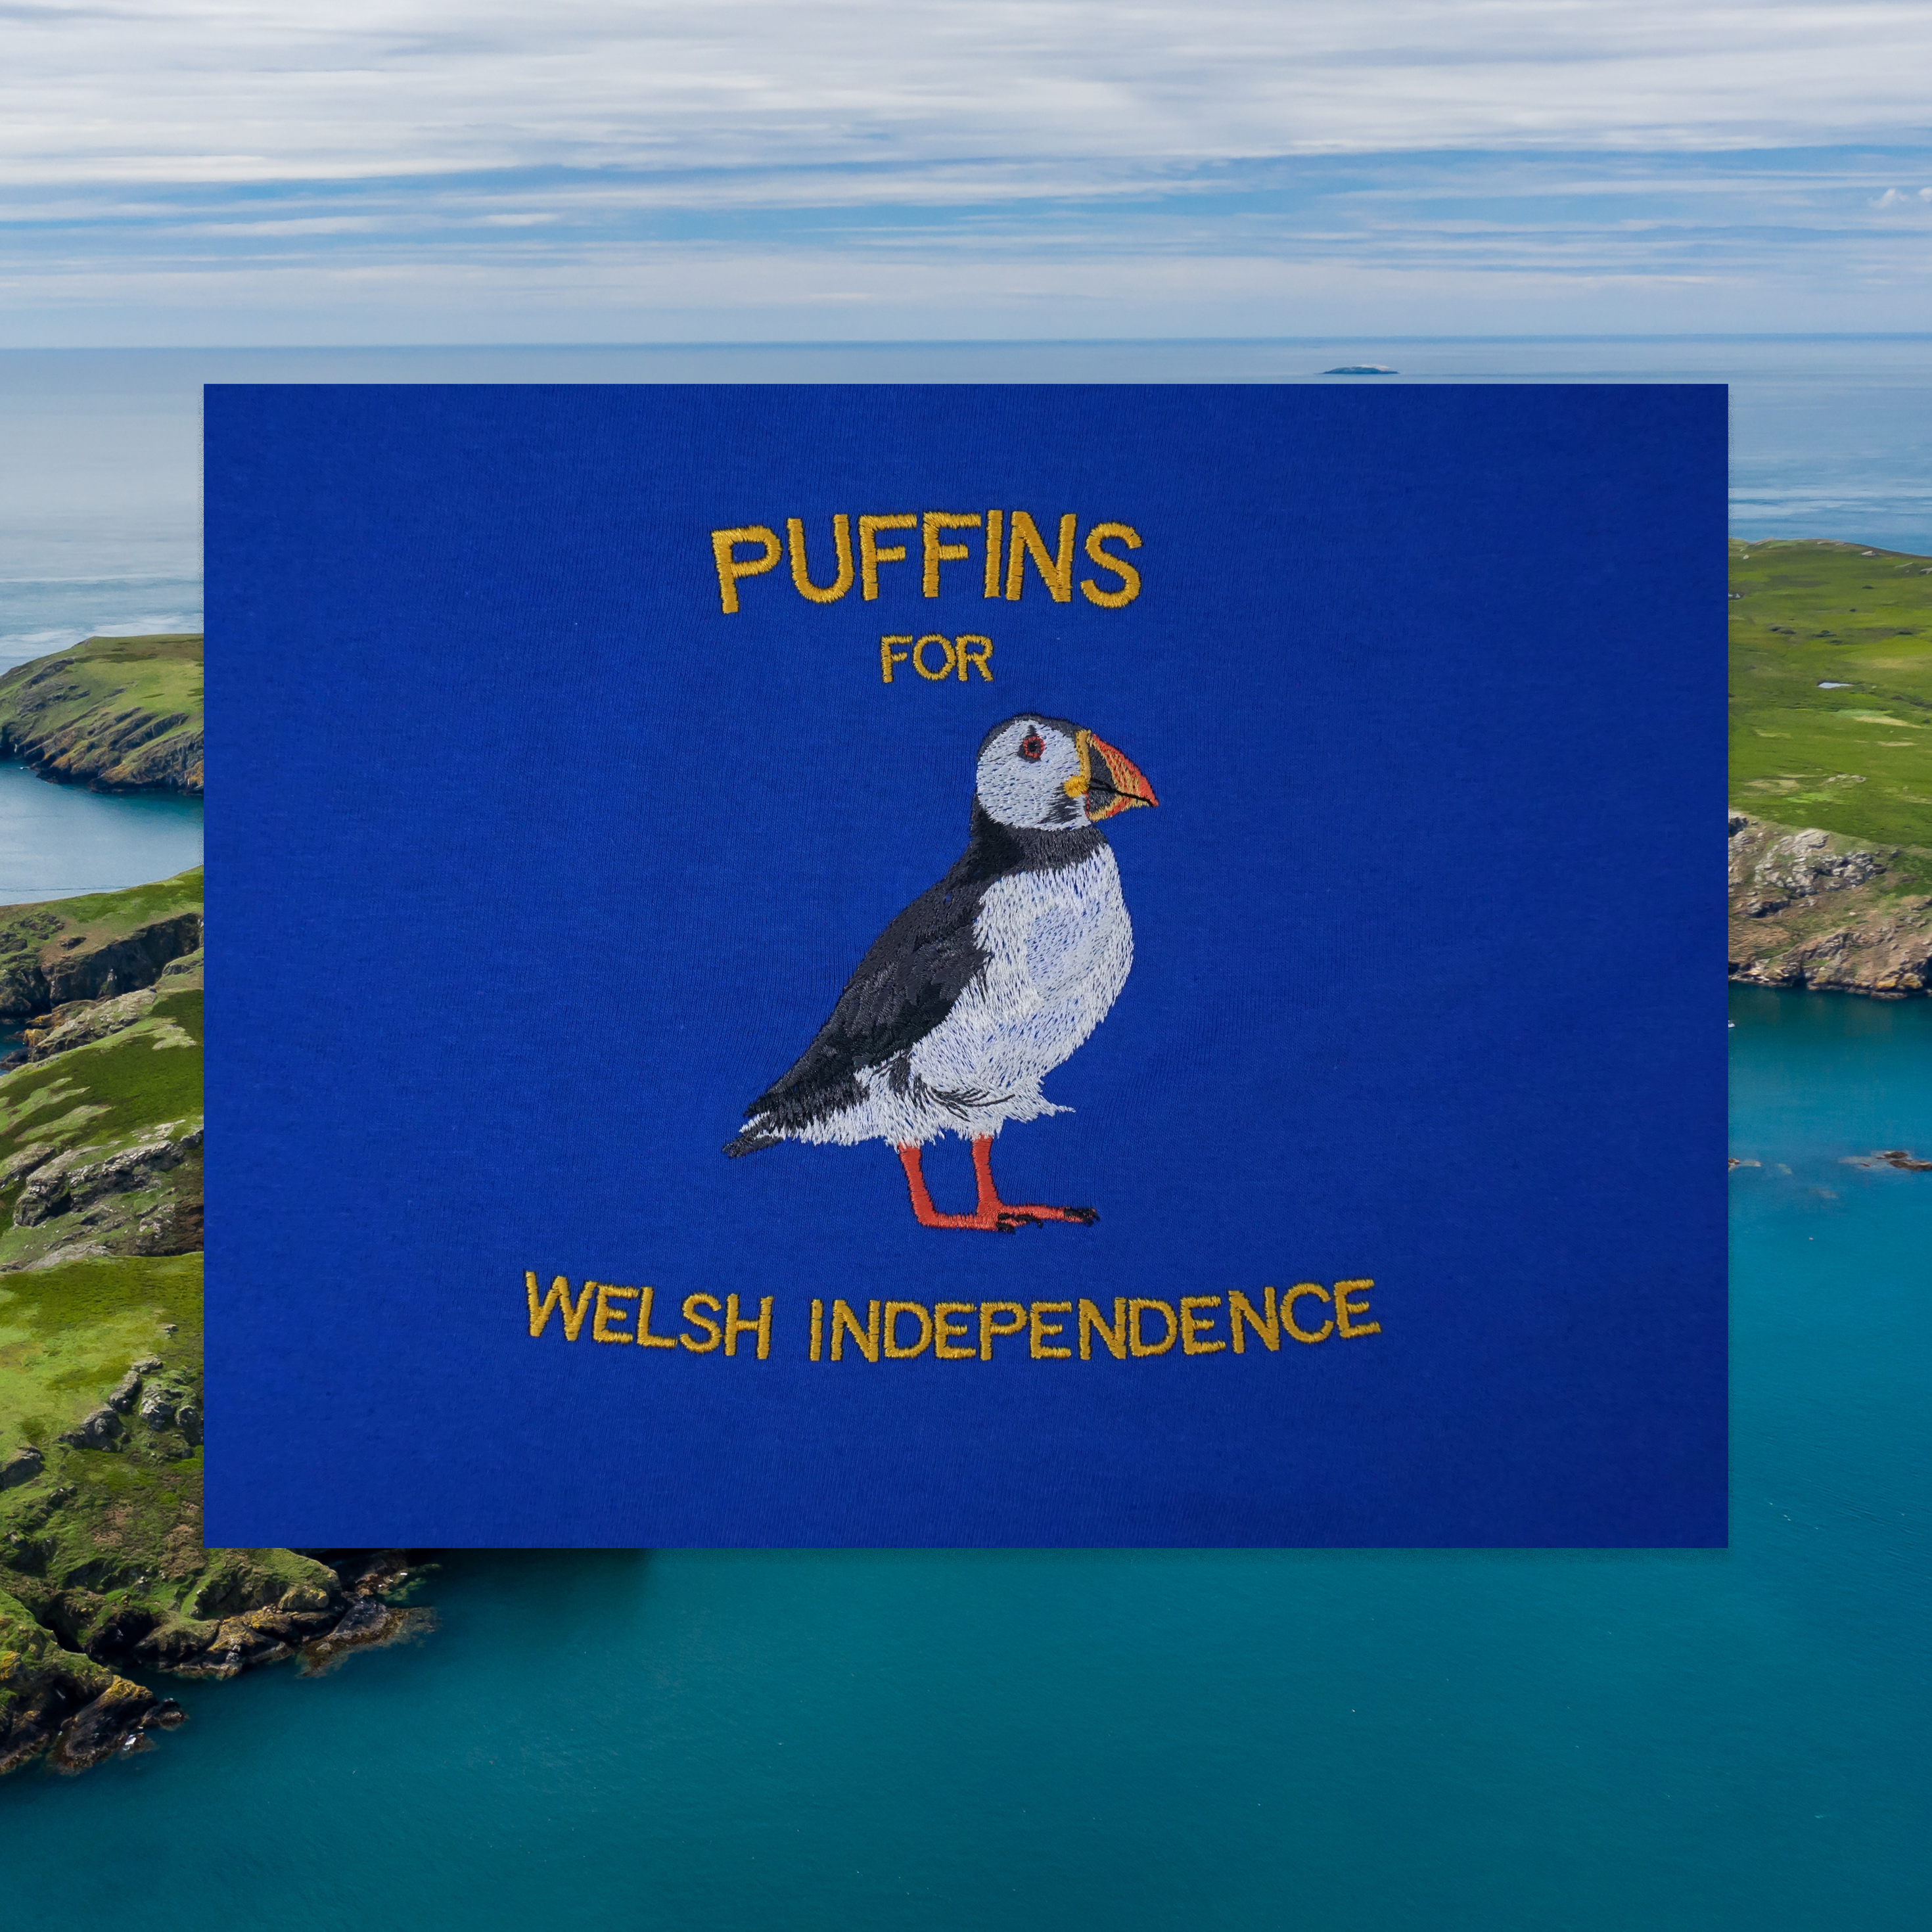 PUFFINS FOR WELSH INDEPENDENCE